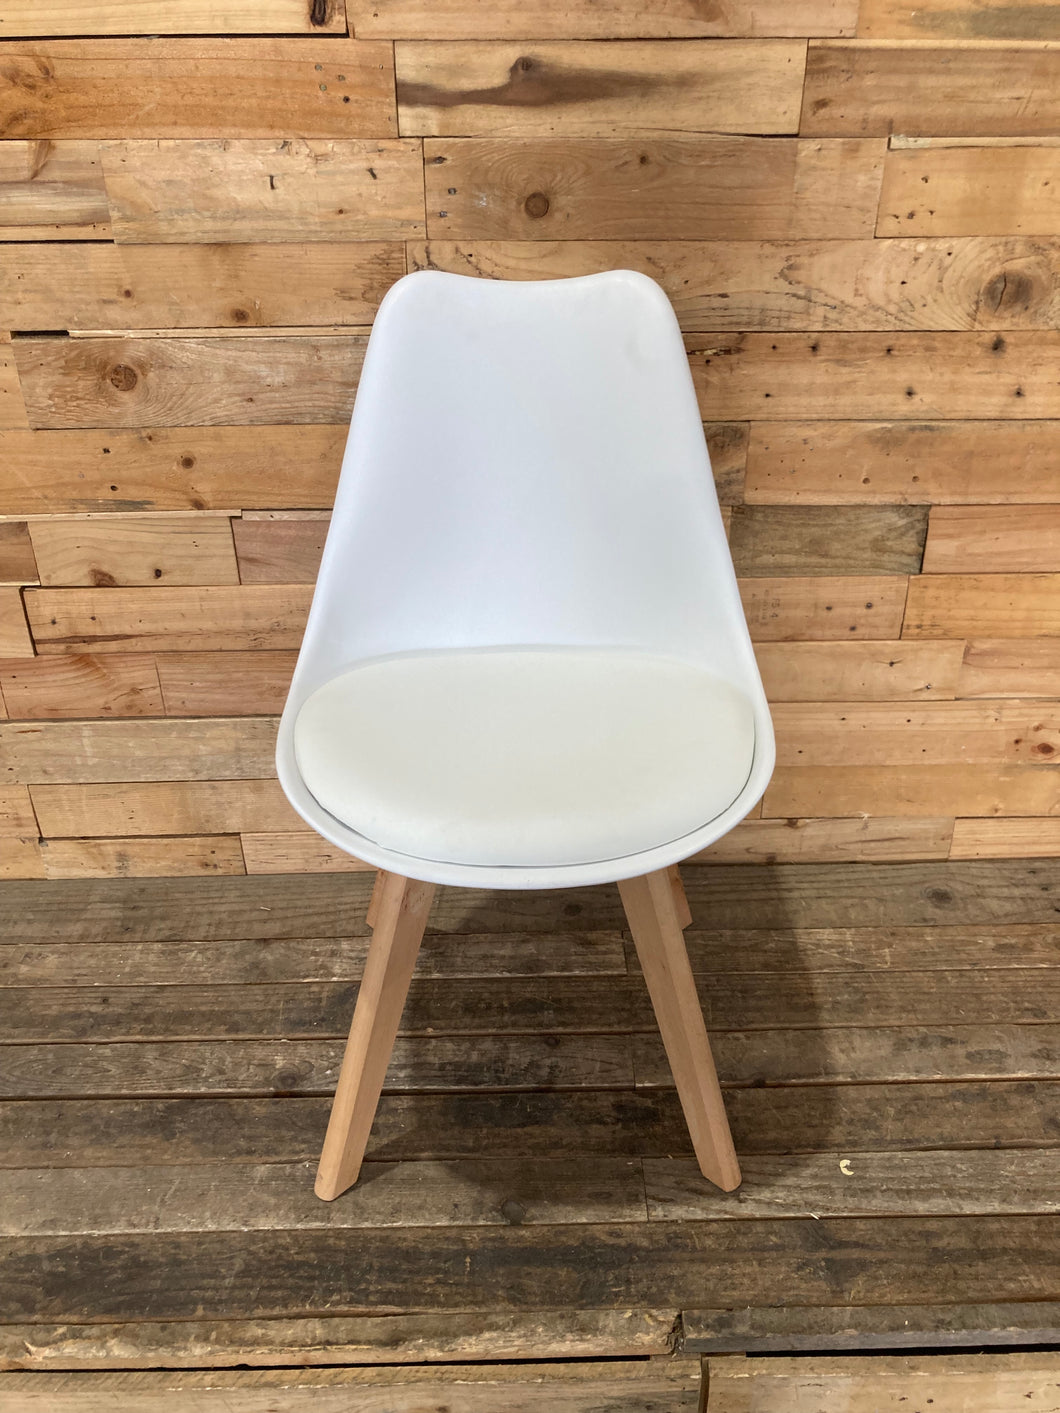 Small White Chair with Wooden Legs